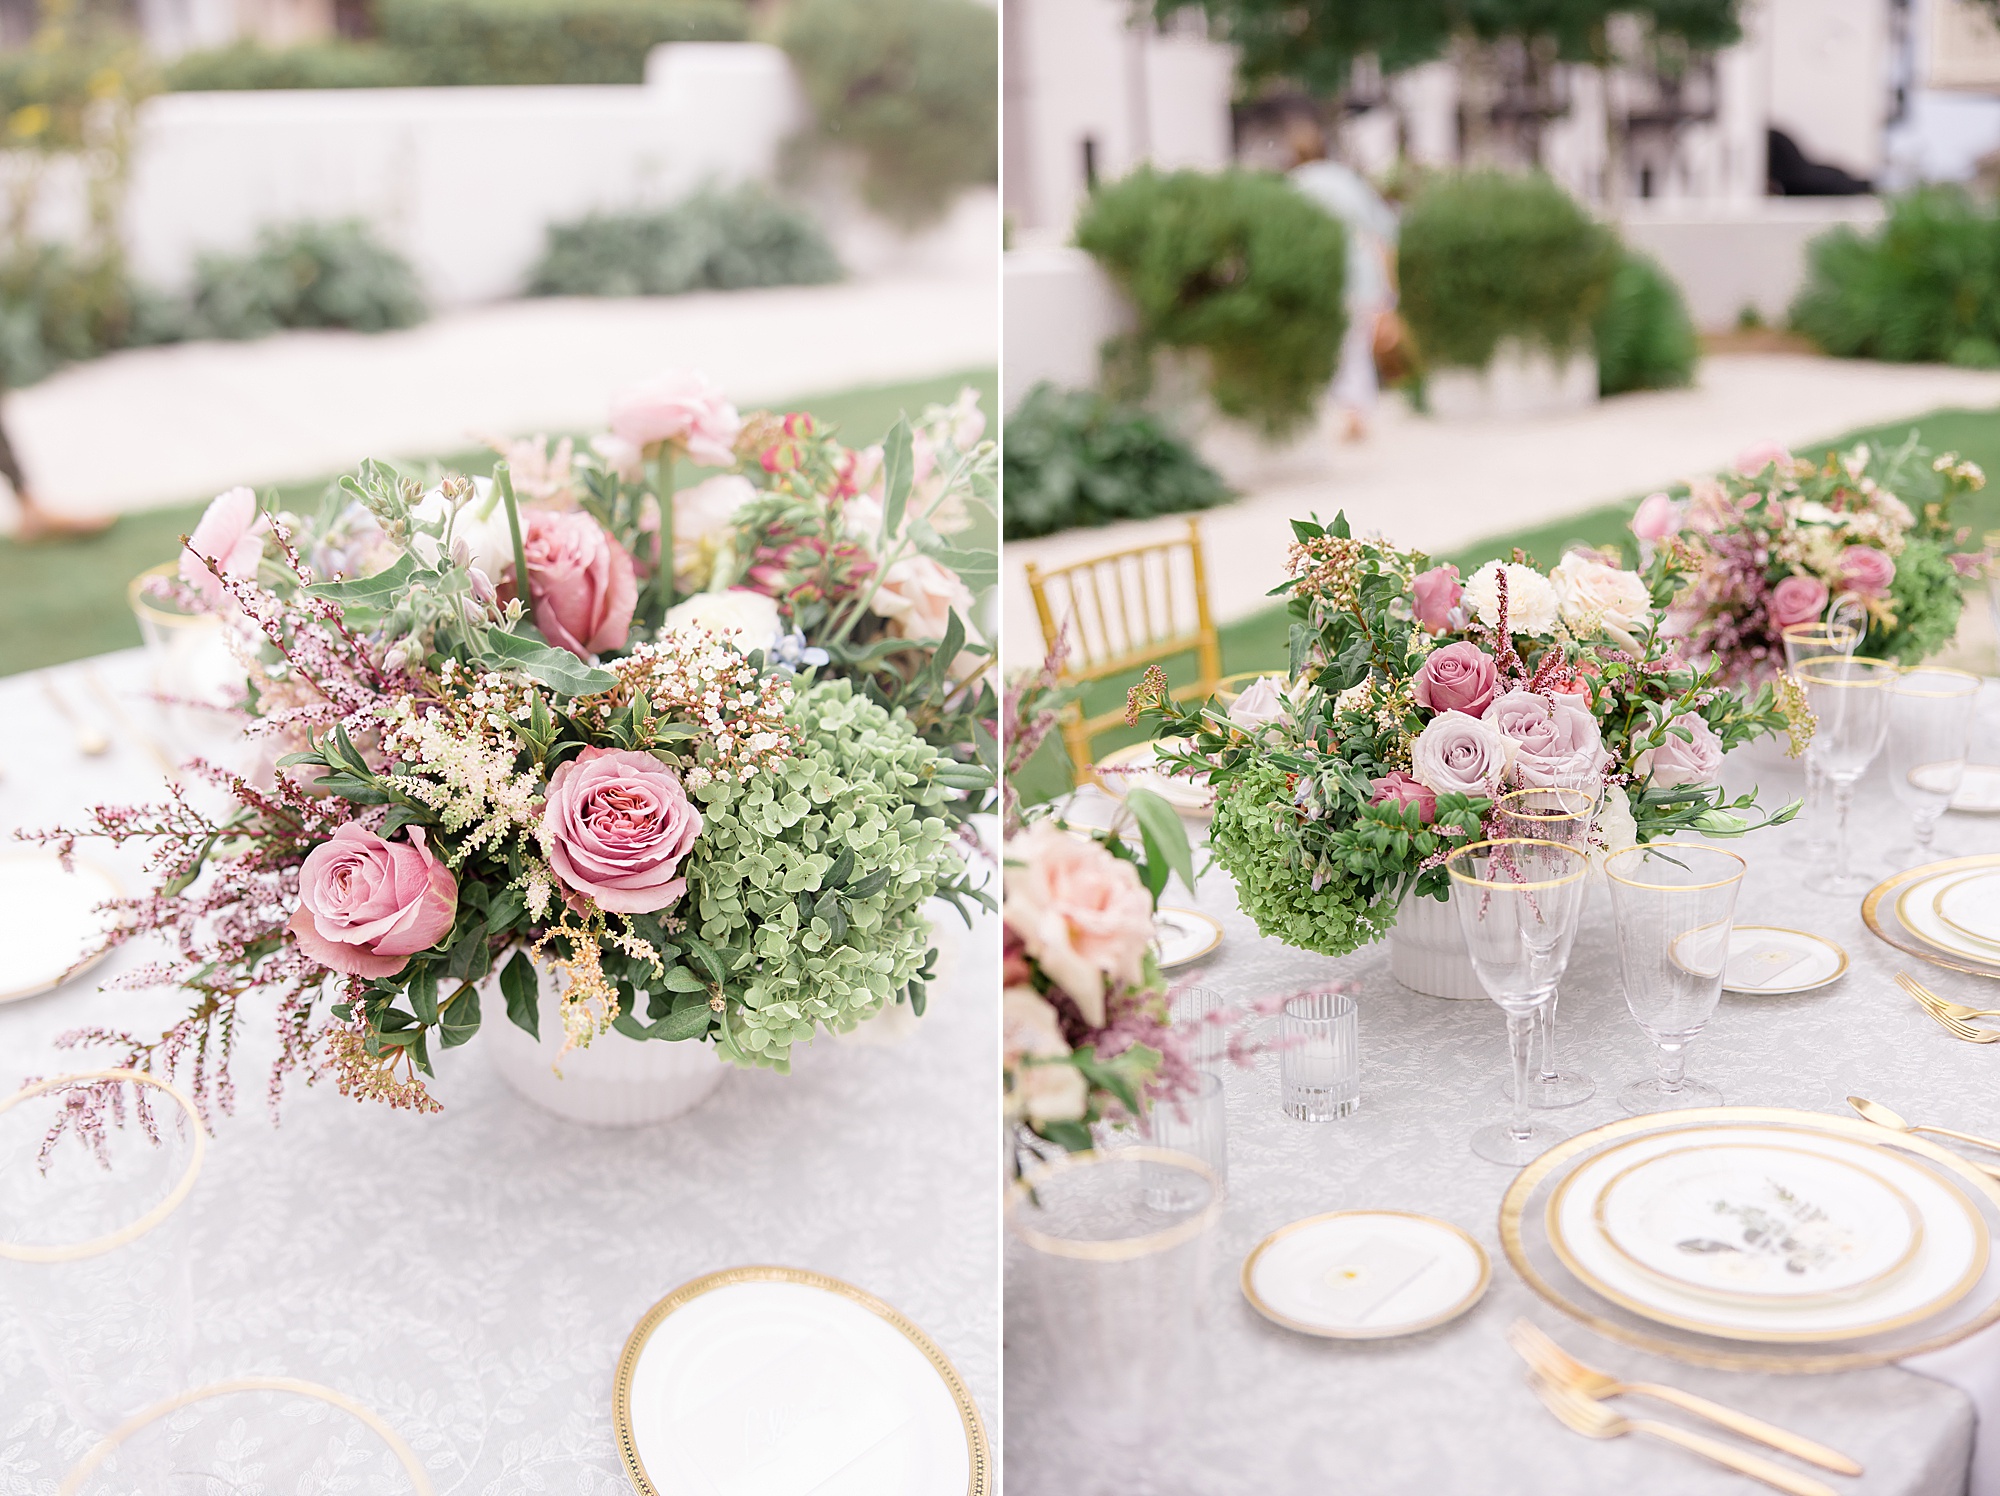 elegant gold, white, and pink wedding reception details at Rosemary Beach Town Hall Wedding